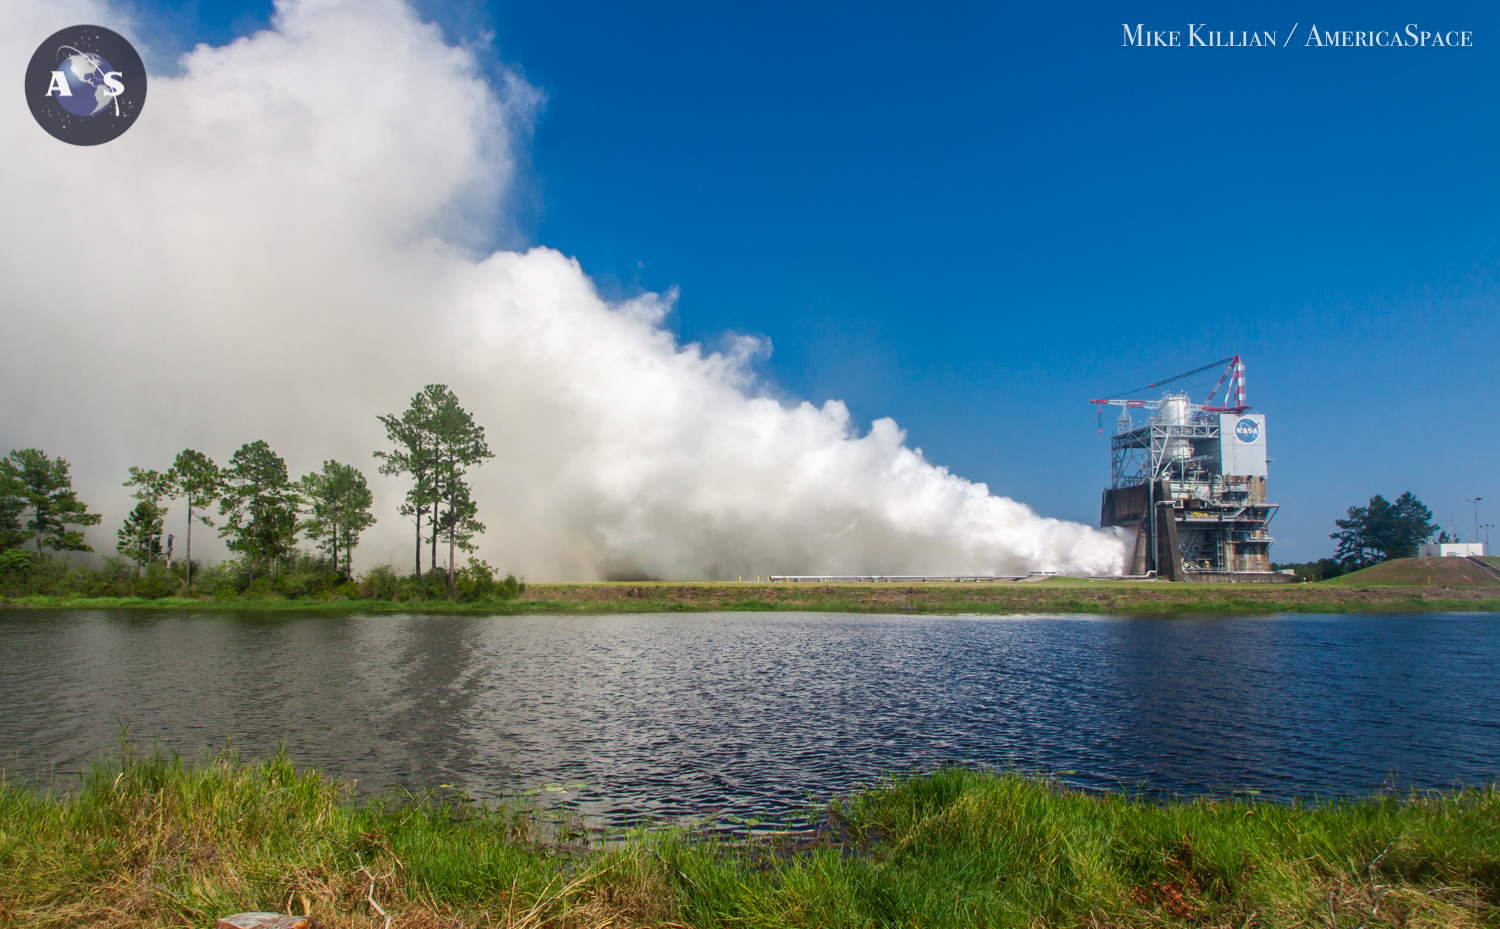 The world's most efficient rocket engine unleashing 512,000 pounds of thrust and a thunderous roar across southern Mississippi and NASA's Stennis Space Center during a 535-second full power test fire in August 2015. The same engine that powered the space shuttle so reliably for years, the RS-25, will again be employed for NASA's Space Launch System, upgraded to meet the new requirements for what will become the most powerful rocket in history. Photo Credit: Mike Killian / AmericaSpace